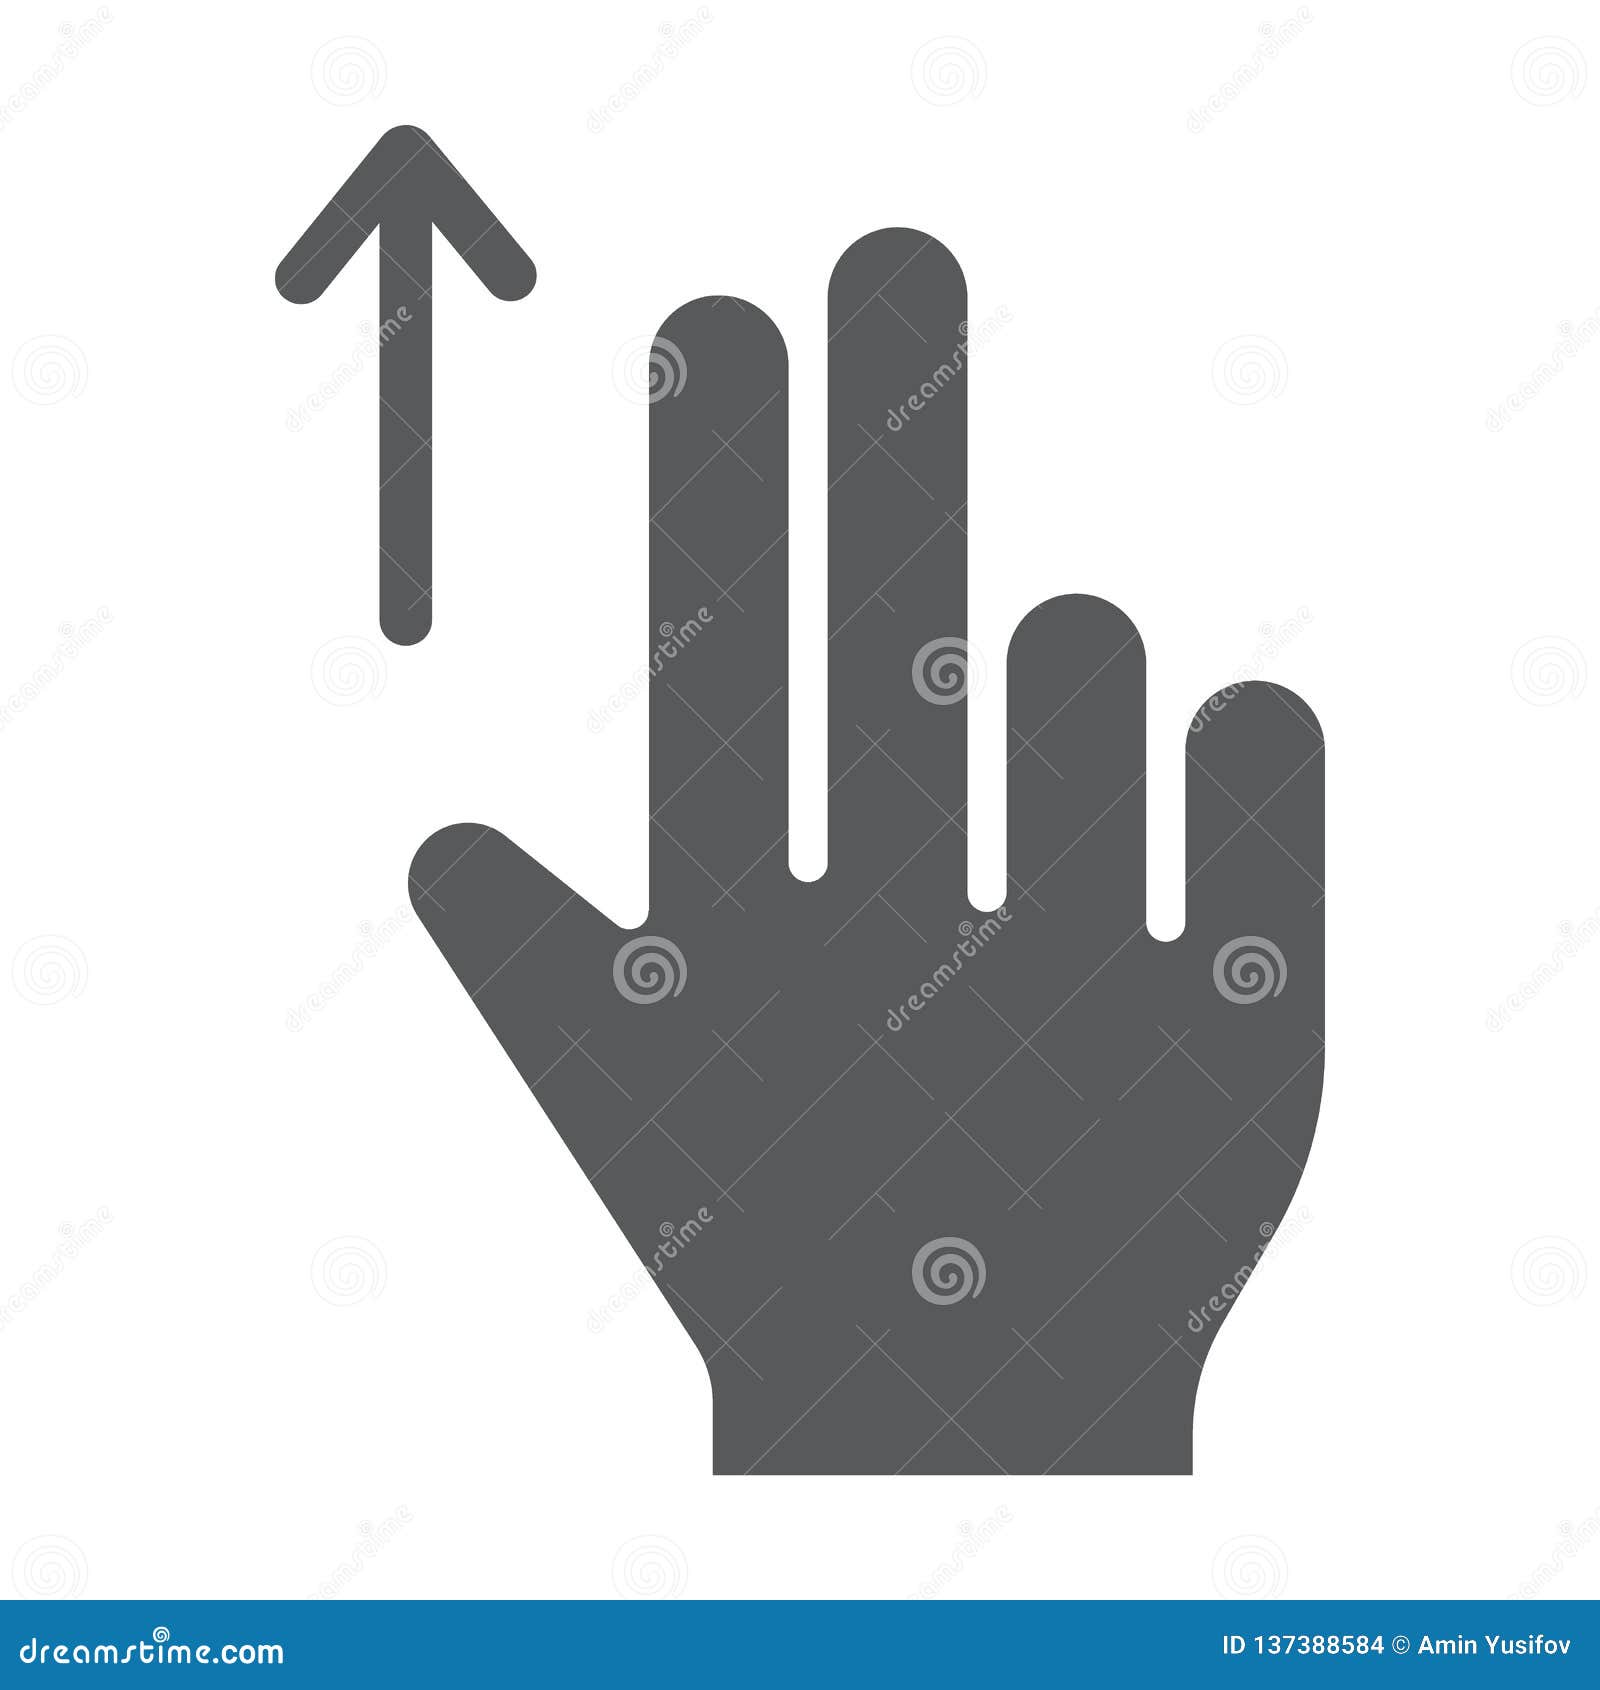 https://thumbs.dreamstime.com/z/two-finger-drag-up-glyph-icon-gesture-hand-flick-sign-vector-graphics-solid-pattern-white-background-eps-137388584.jpg